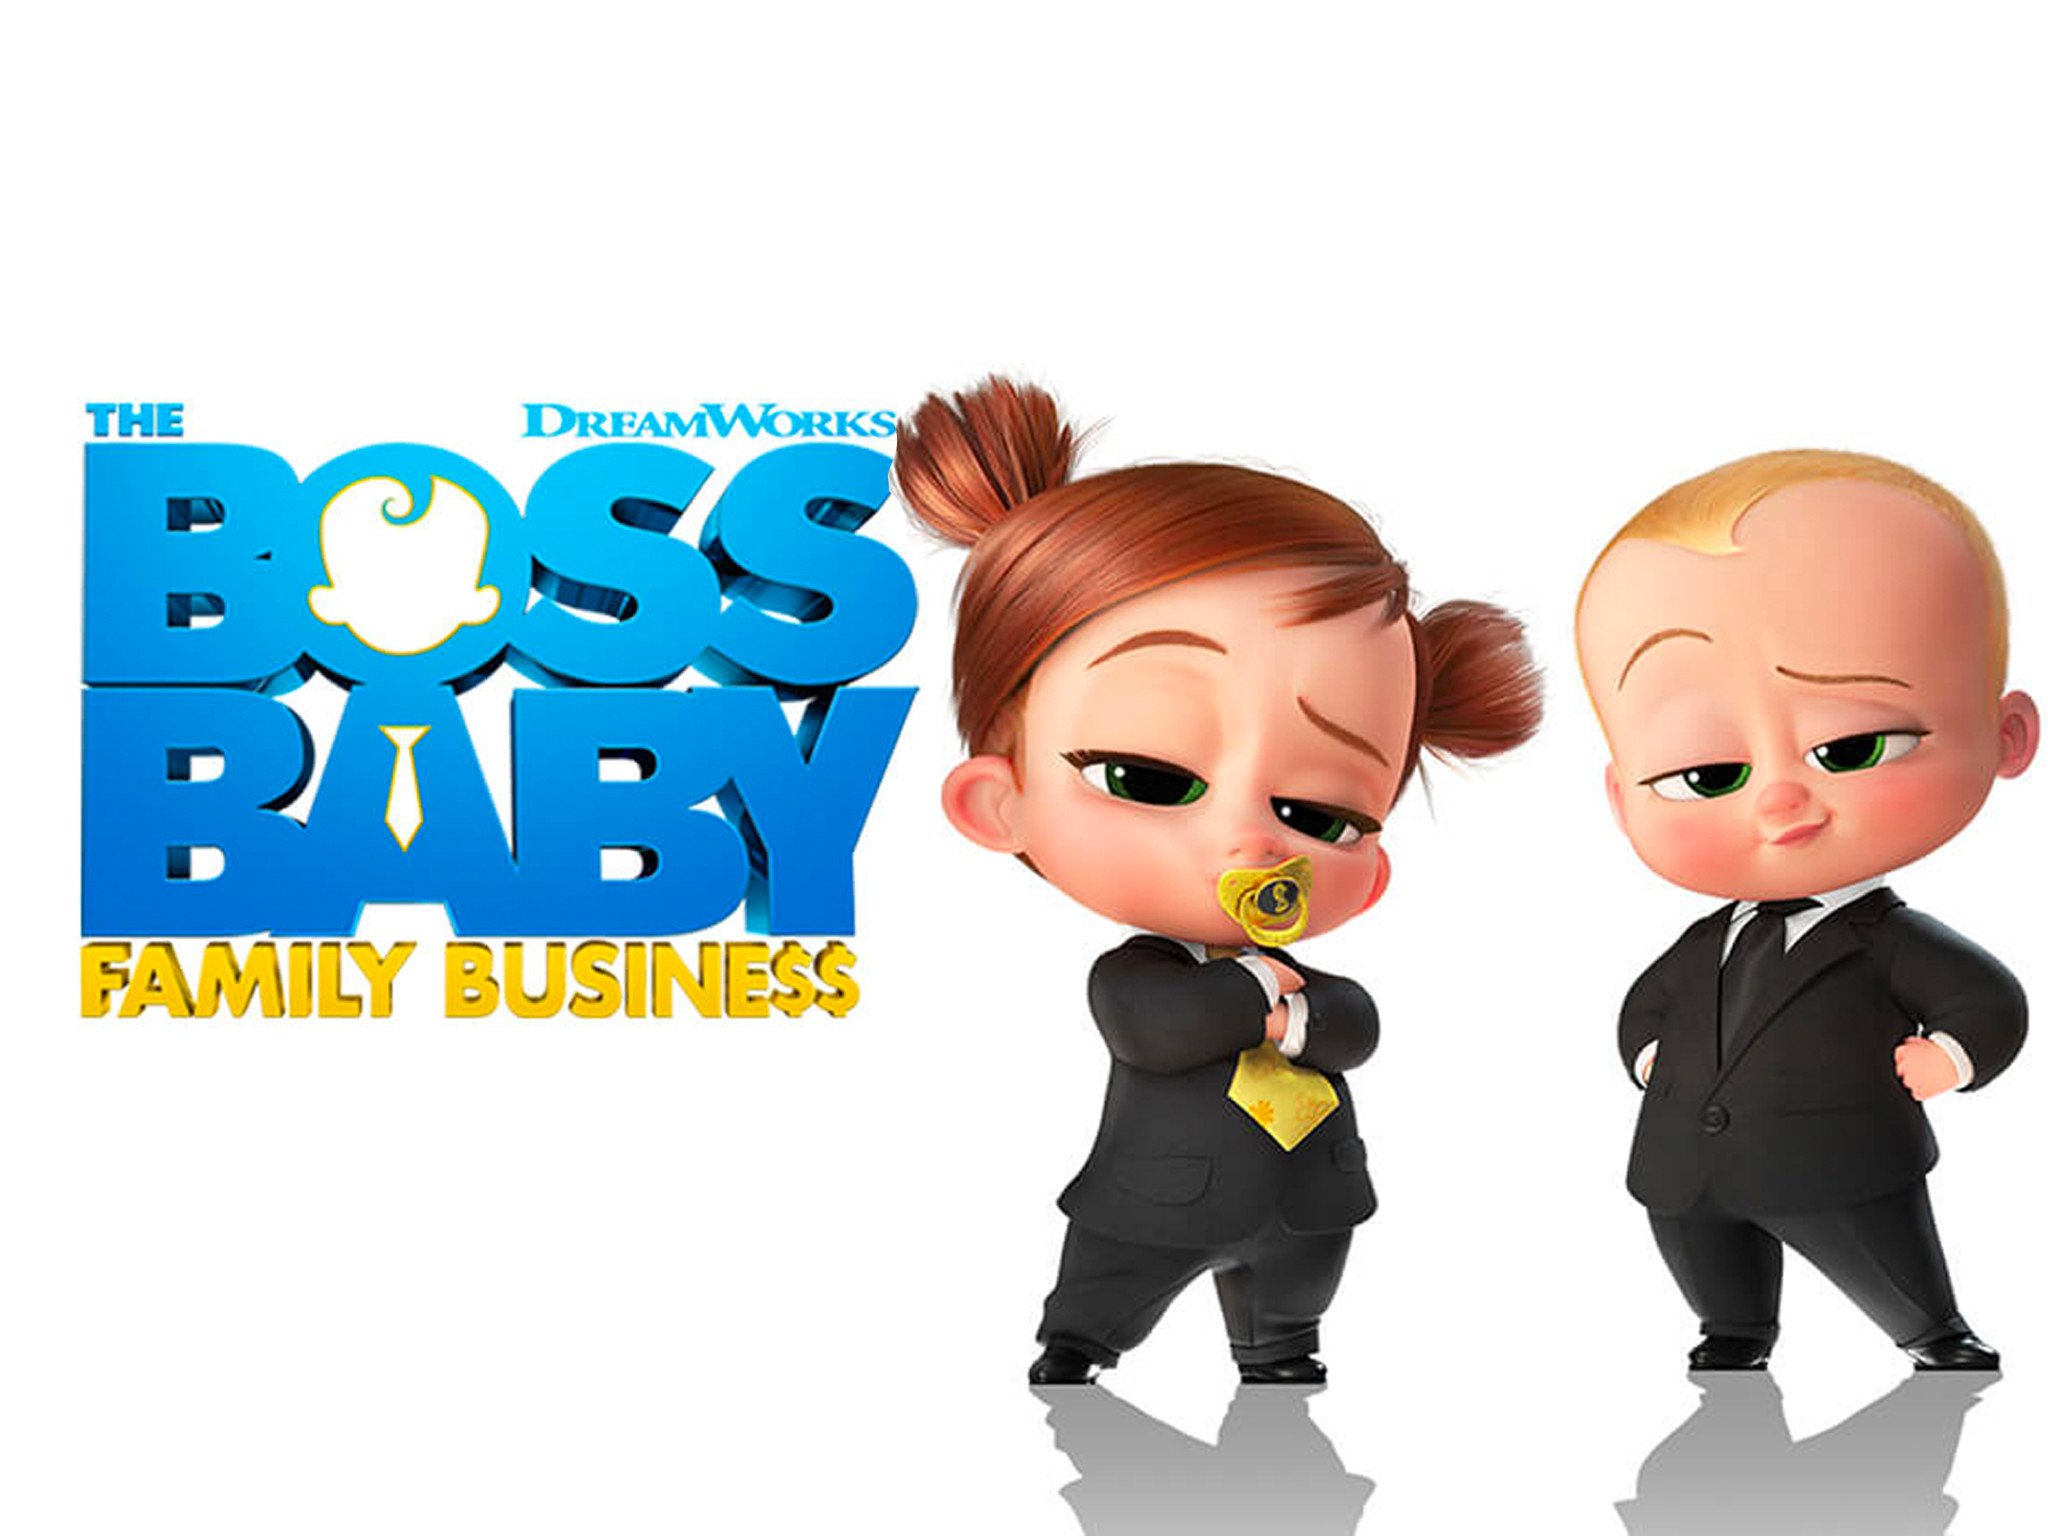 How to watch ‘The Boss Baby: Family Business’: Stream the animated sequel online from anywhere